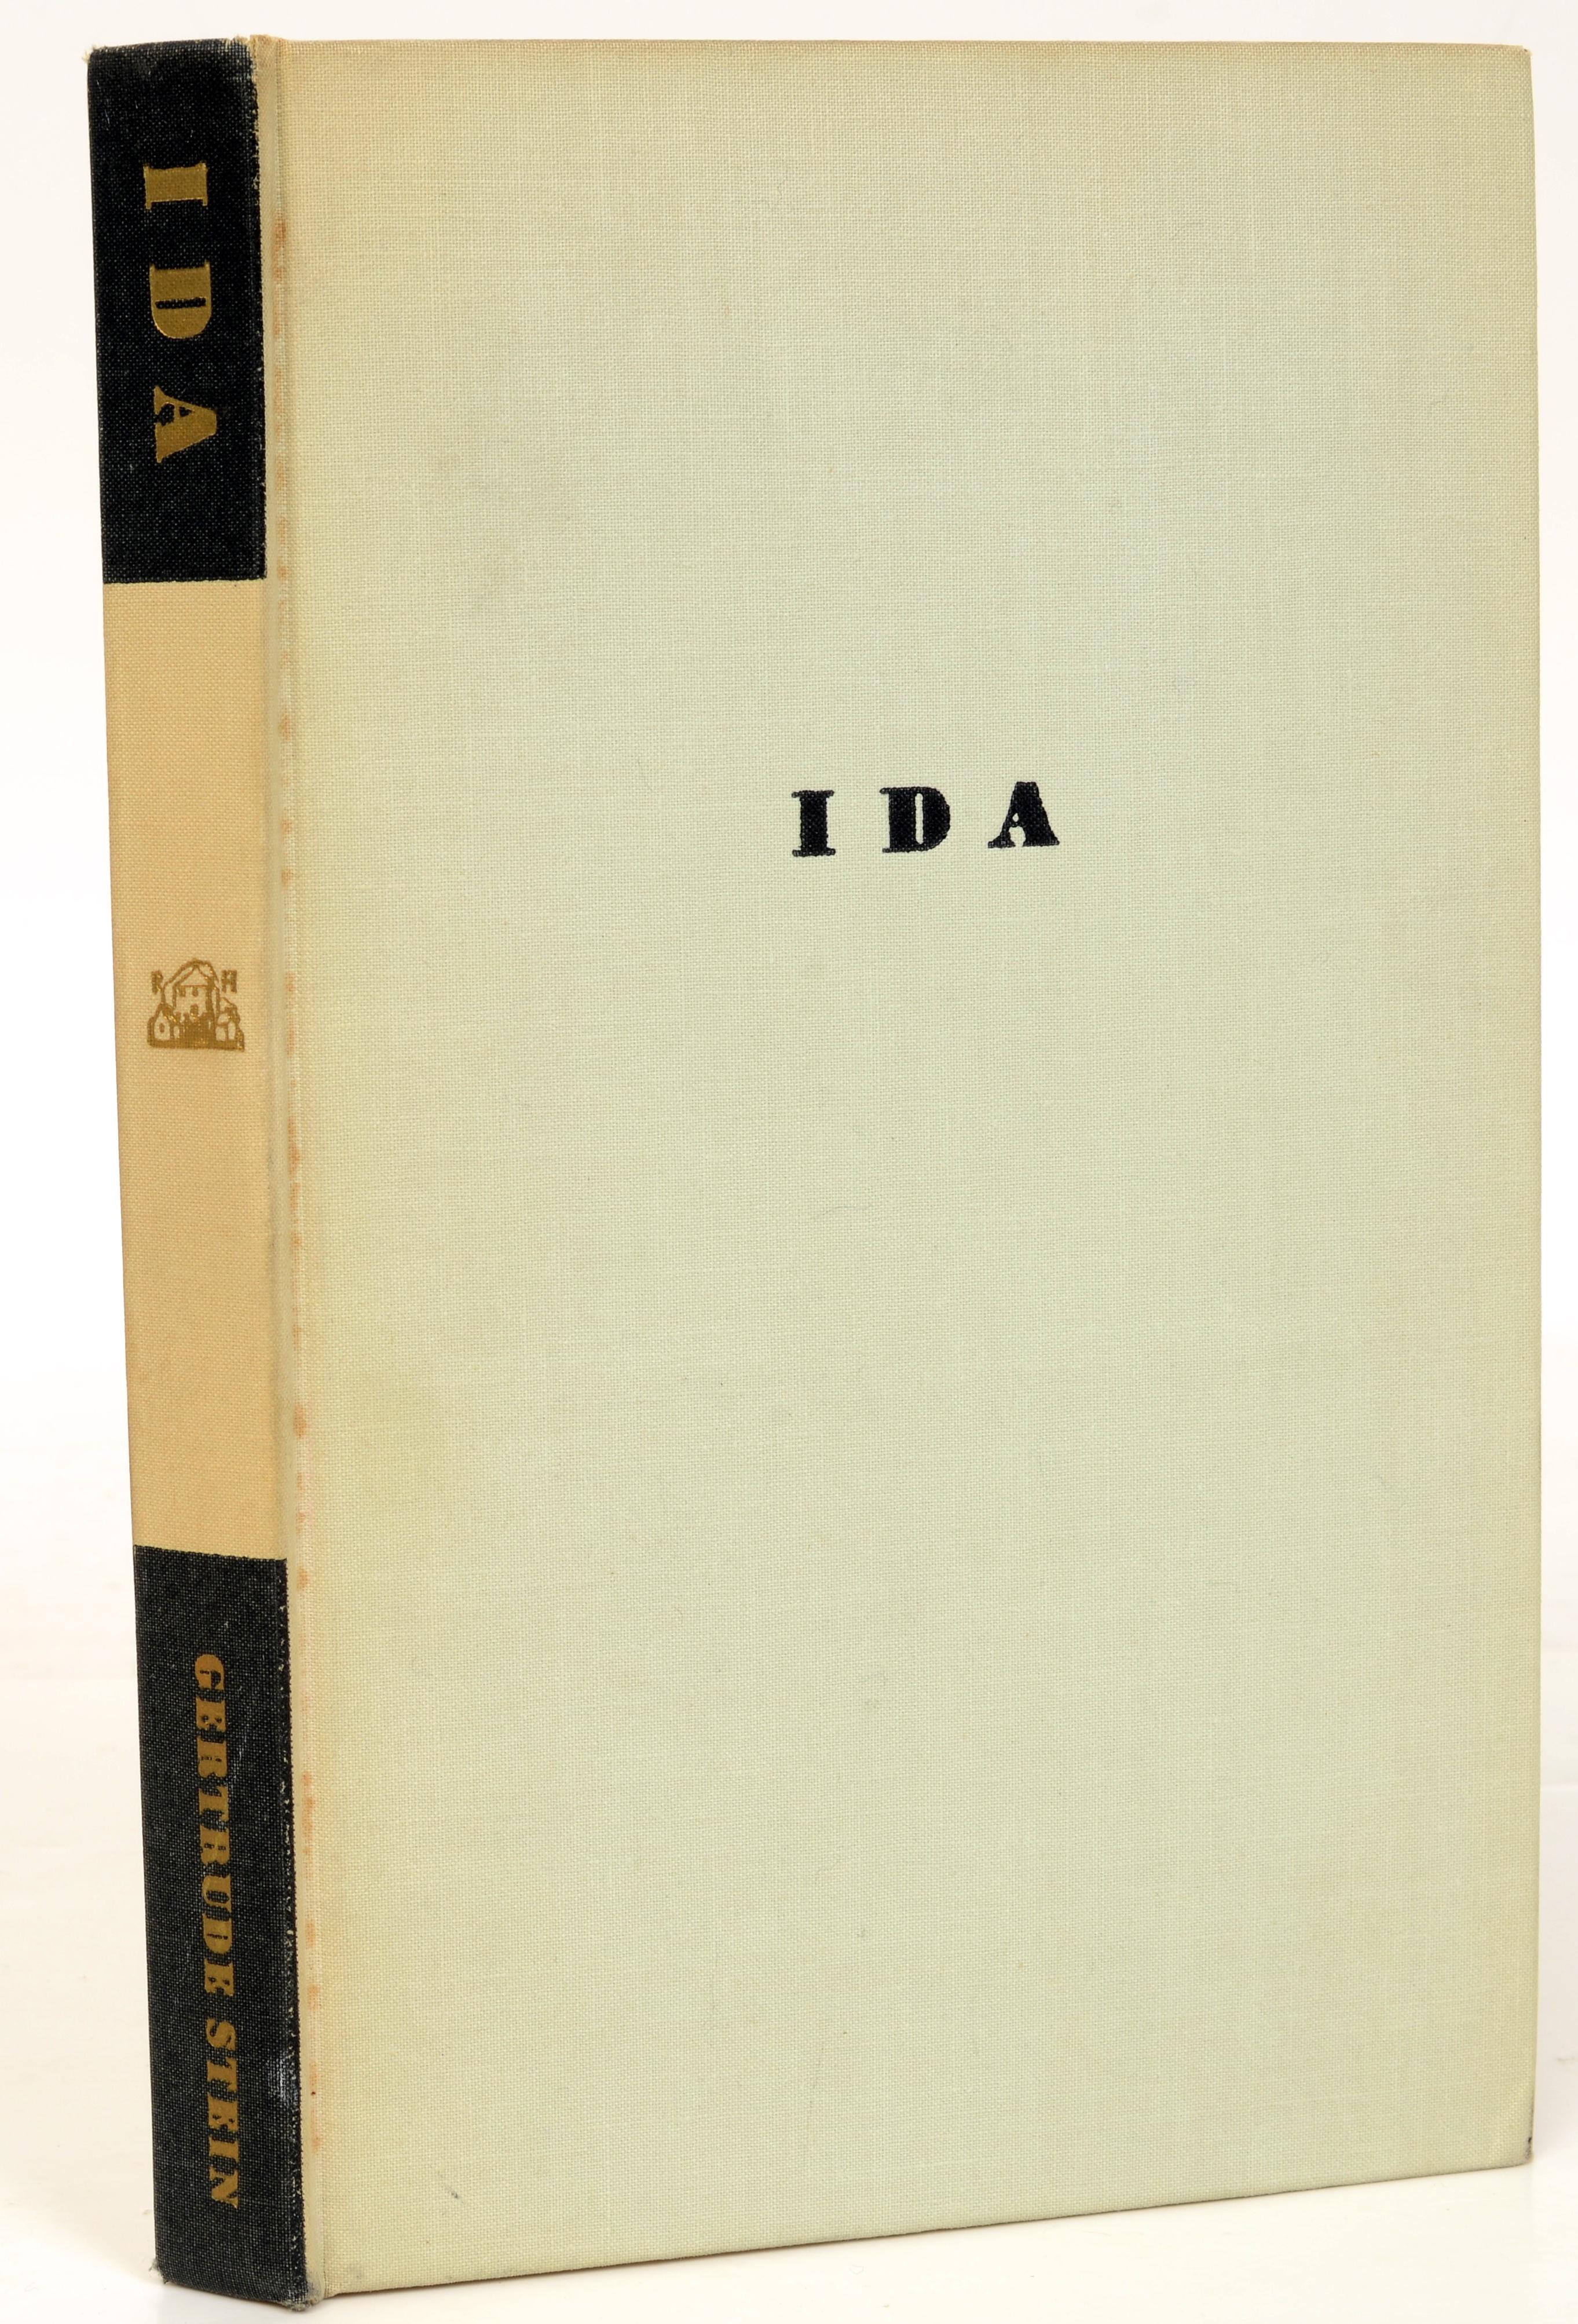 Ida A Novel by Gertrude Stein. New York: Random House, 1941. Stated 1st Ed hardcover. Gertrude Stein wanted Ida to be known in two ways: as a novel about a woman in the age of celebrity culture and as a text with its own story to tell. Stein's